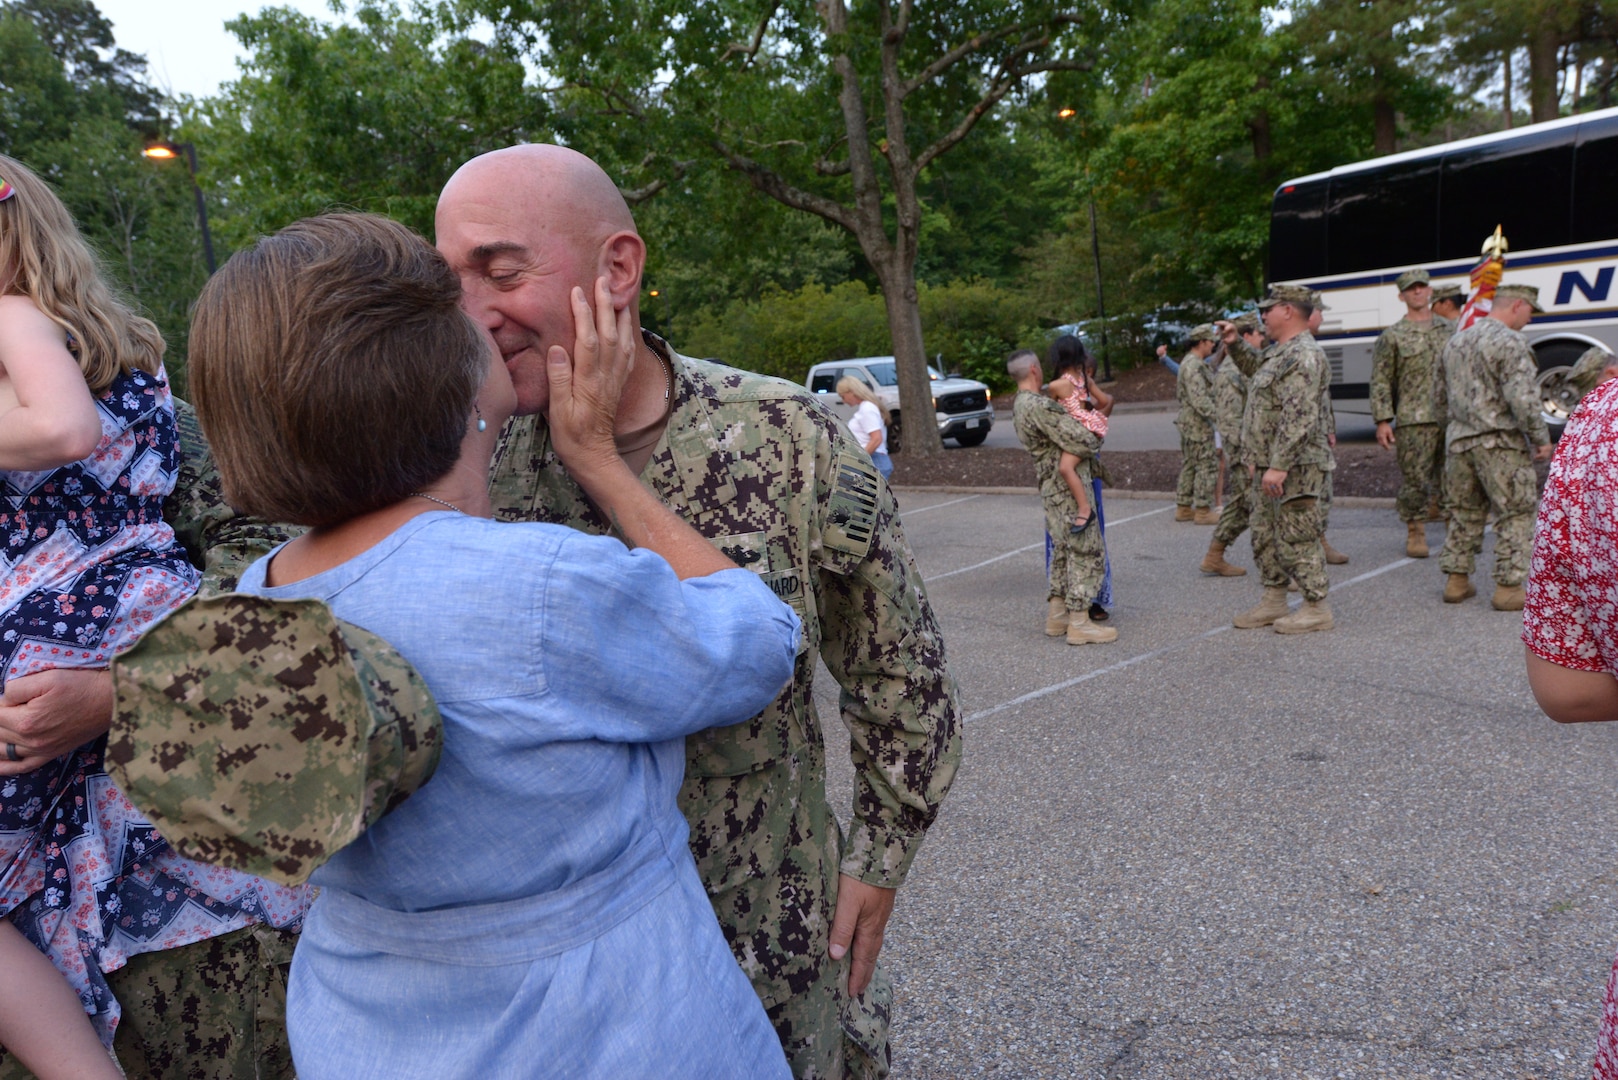 Cmdr. James Lovenstein, Port Security Unit (PSU) 305’s commanding officer, is welcomed home in Williamsburg, Va. after returning from a nine-month deployment to Naval Station Guantanamo Bay, Cuba, June 15, 2023.

PSU 305, based in Fort Eustis, Va., was the first unit in 2002 to begin the Coast Guard’s mission with Joint Task Force- Guantanamo and is the last to complete it. (U.S. Coast Guard photo by Petty Officer 1st Class Valerie Higdon)